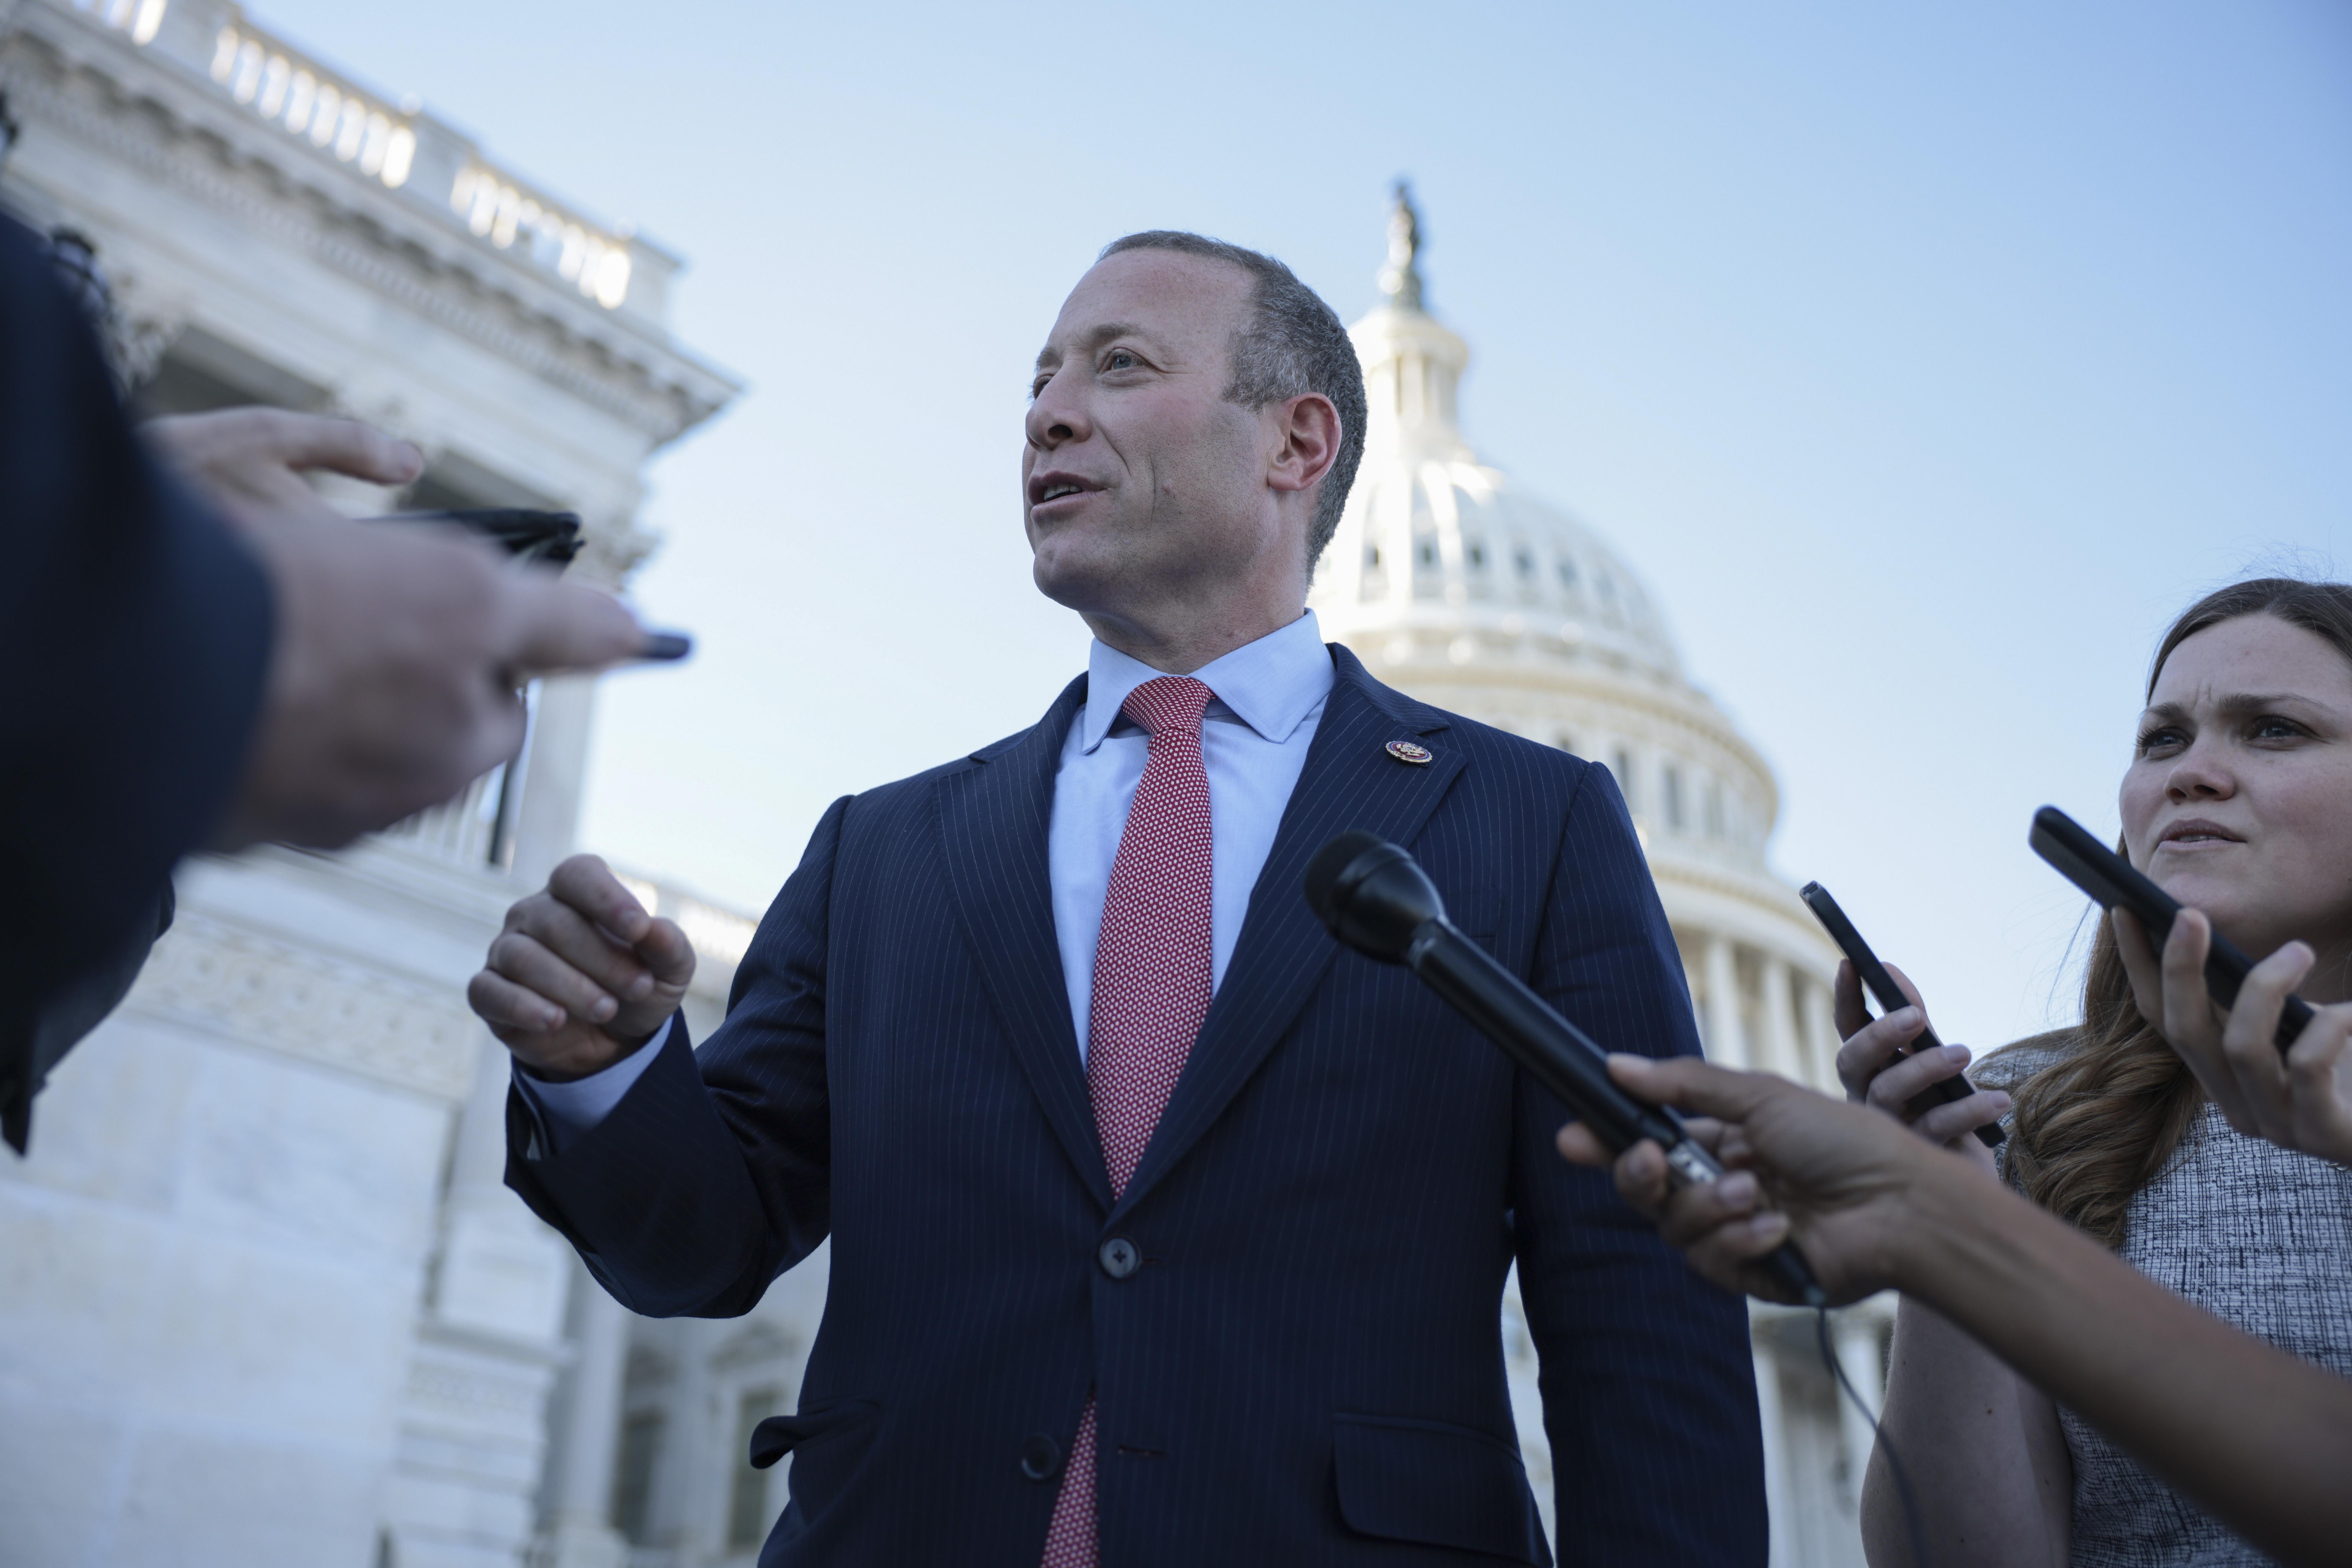 WASHINGTON, DC - OCTOBER 21: Rep. Josh Gottheimer (D-NJ) speaks to reporters after a House vote to hold former Trump adviser Stephen Bannon in criminal contempt at the U.S. Capitol Building on October 21, 2021 in Washington, DC. The House voted 229-202 to hold Bannon in contempt for refusing to cooperate with the select committee investigating the January 6 attack. Nine Republicans voted with Democrats. (Photo by Anna Moneymaker/Getty Images)